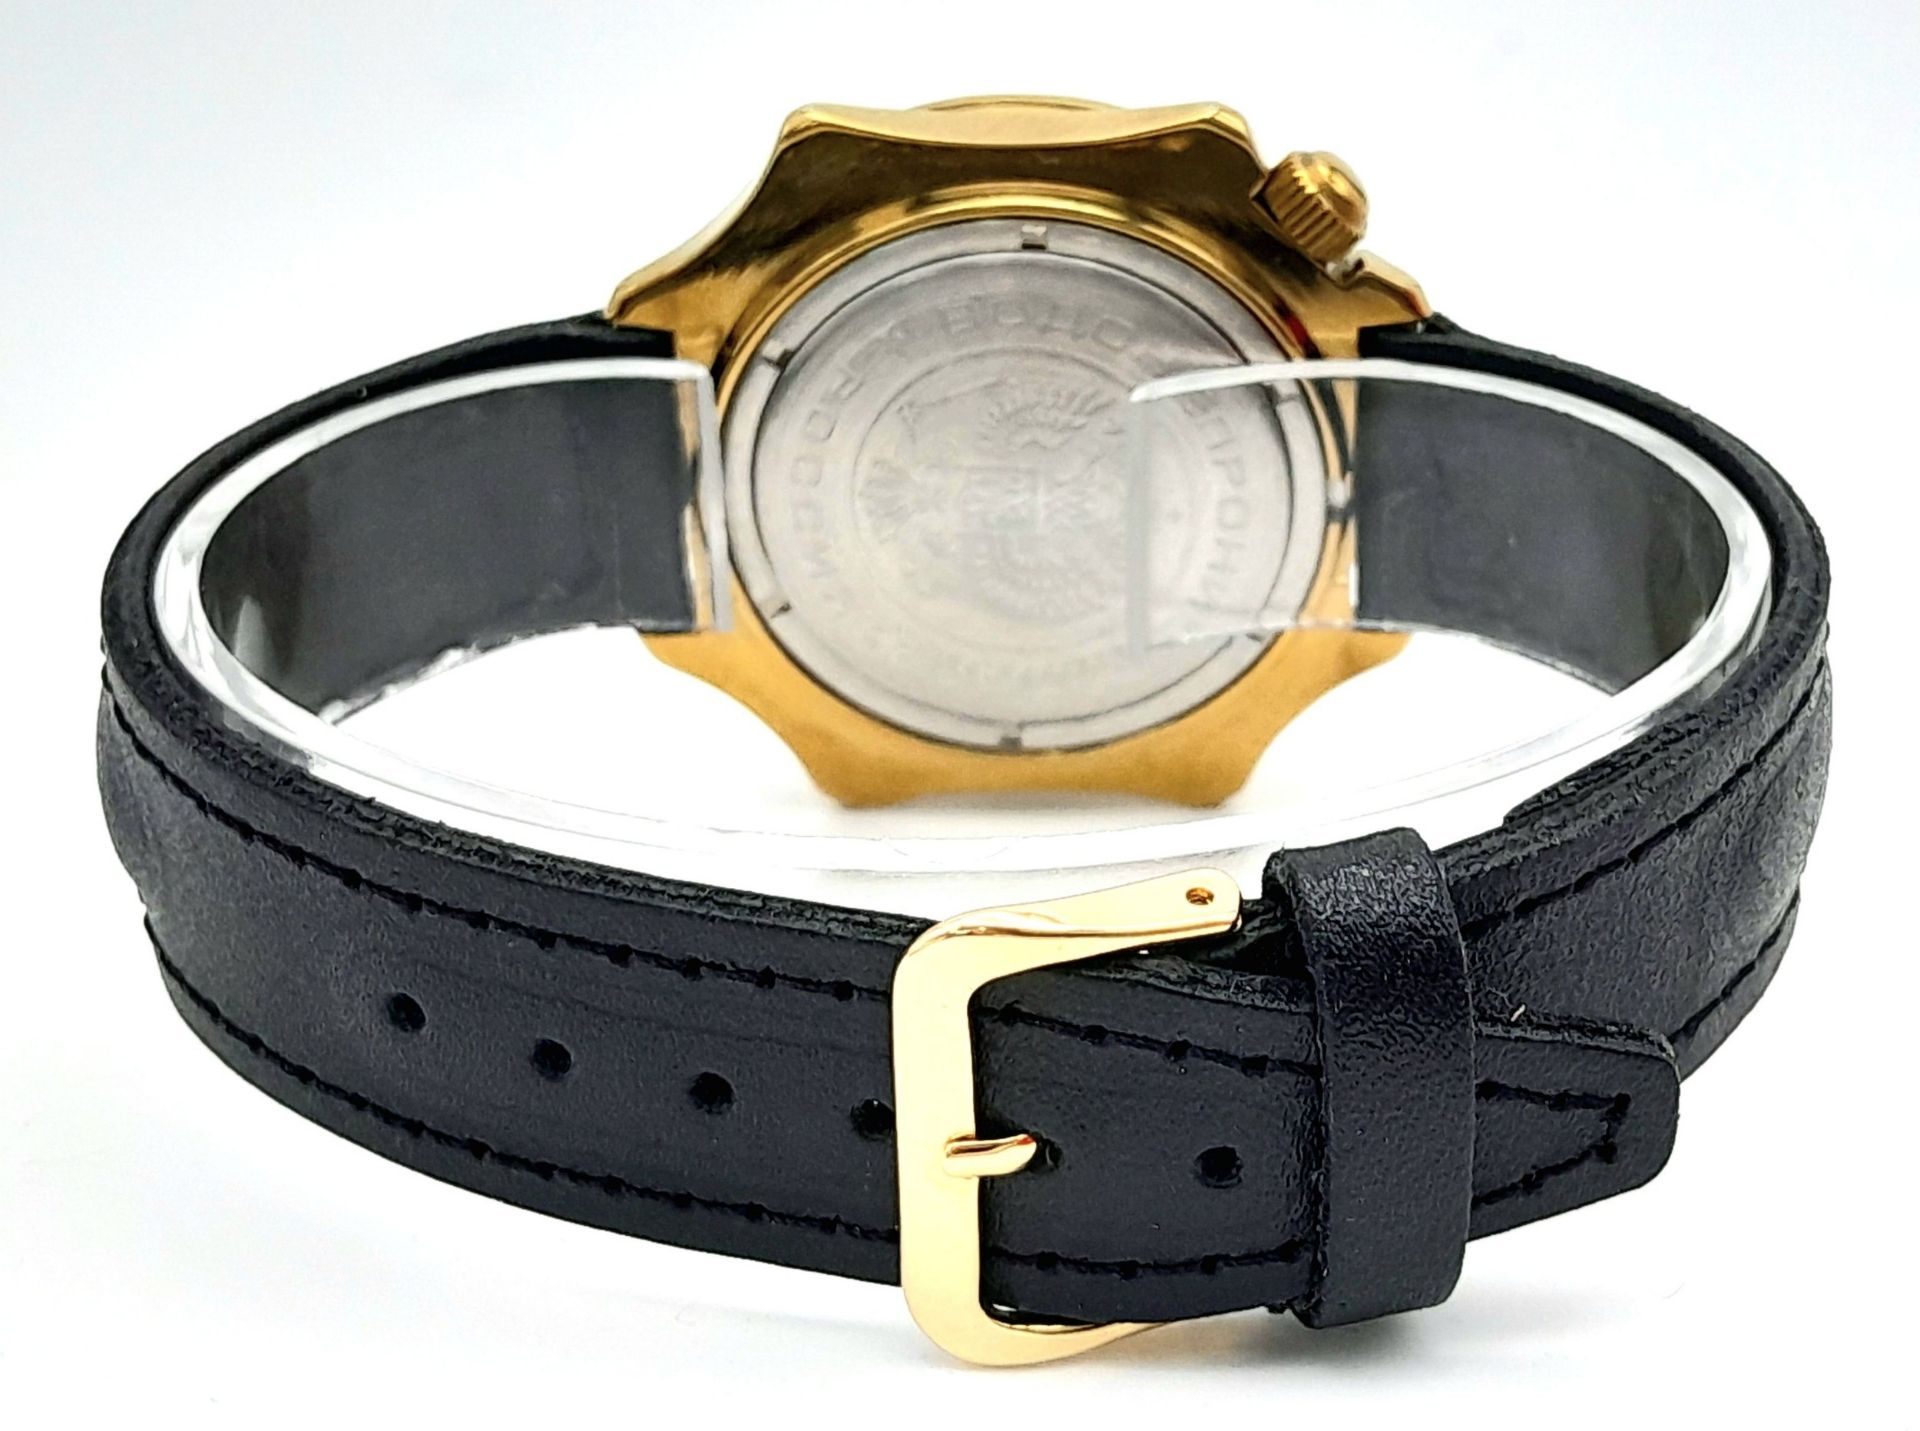 A Vostok Automatic Gents Watch. Black leather strap. Stainless steel gilded case - 40mm. Black - Image 4 of 6